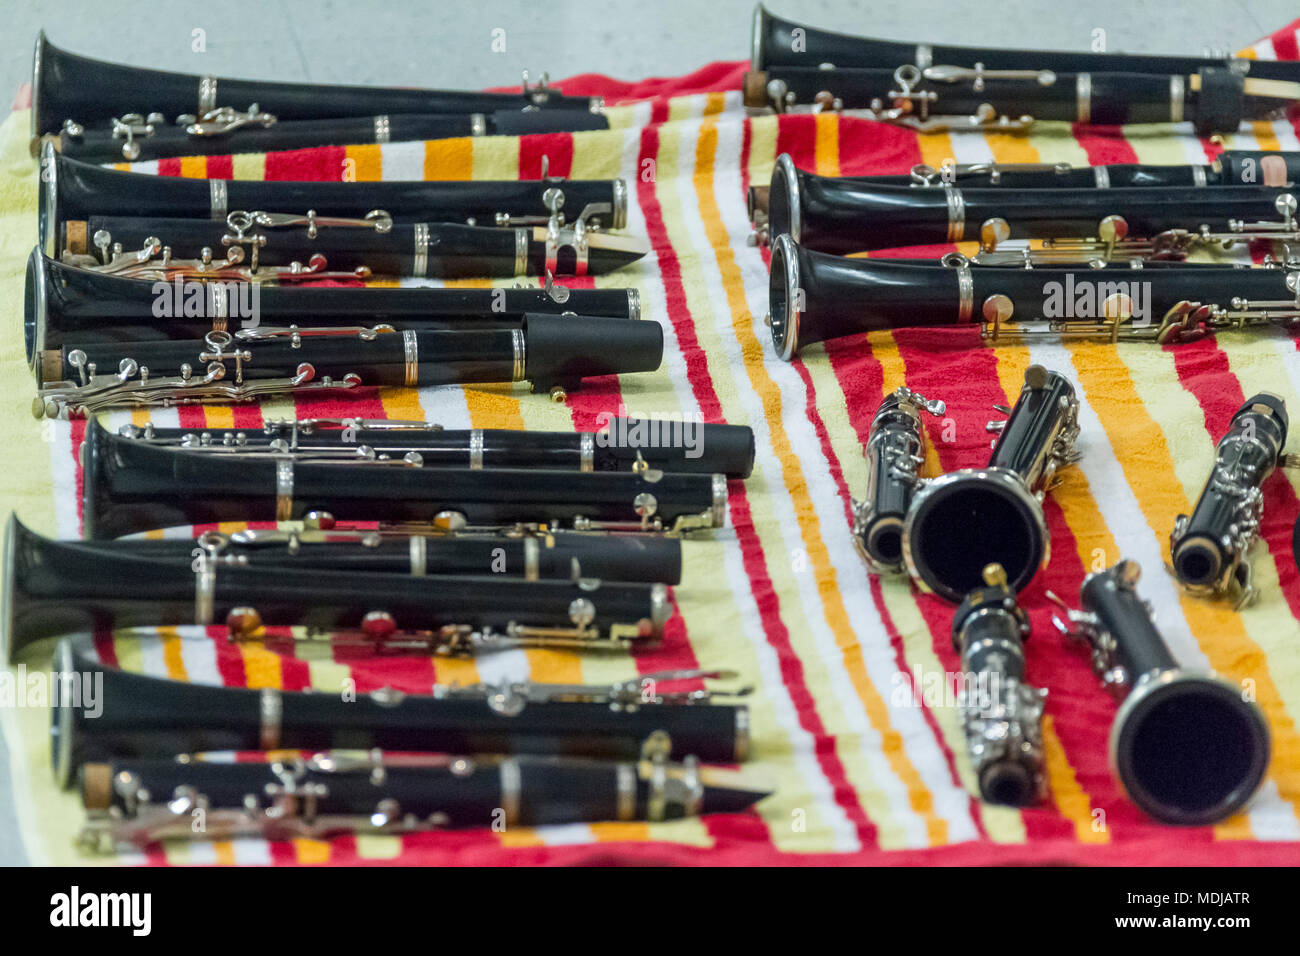 several clarinets resting on a beach towel at rehearsal Stock Photo